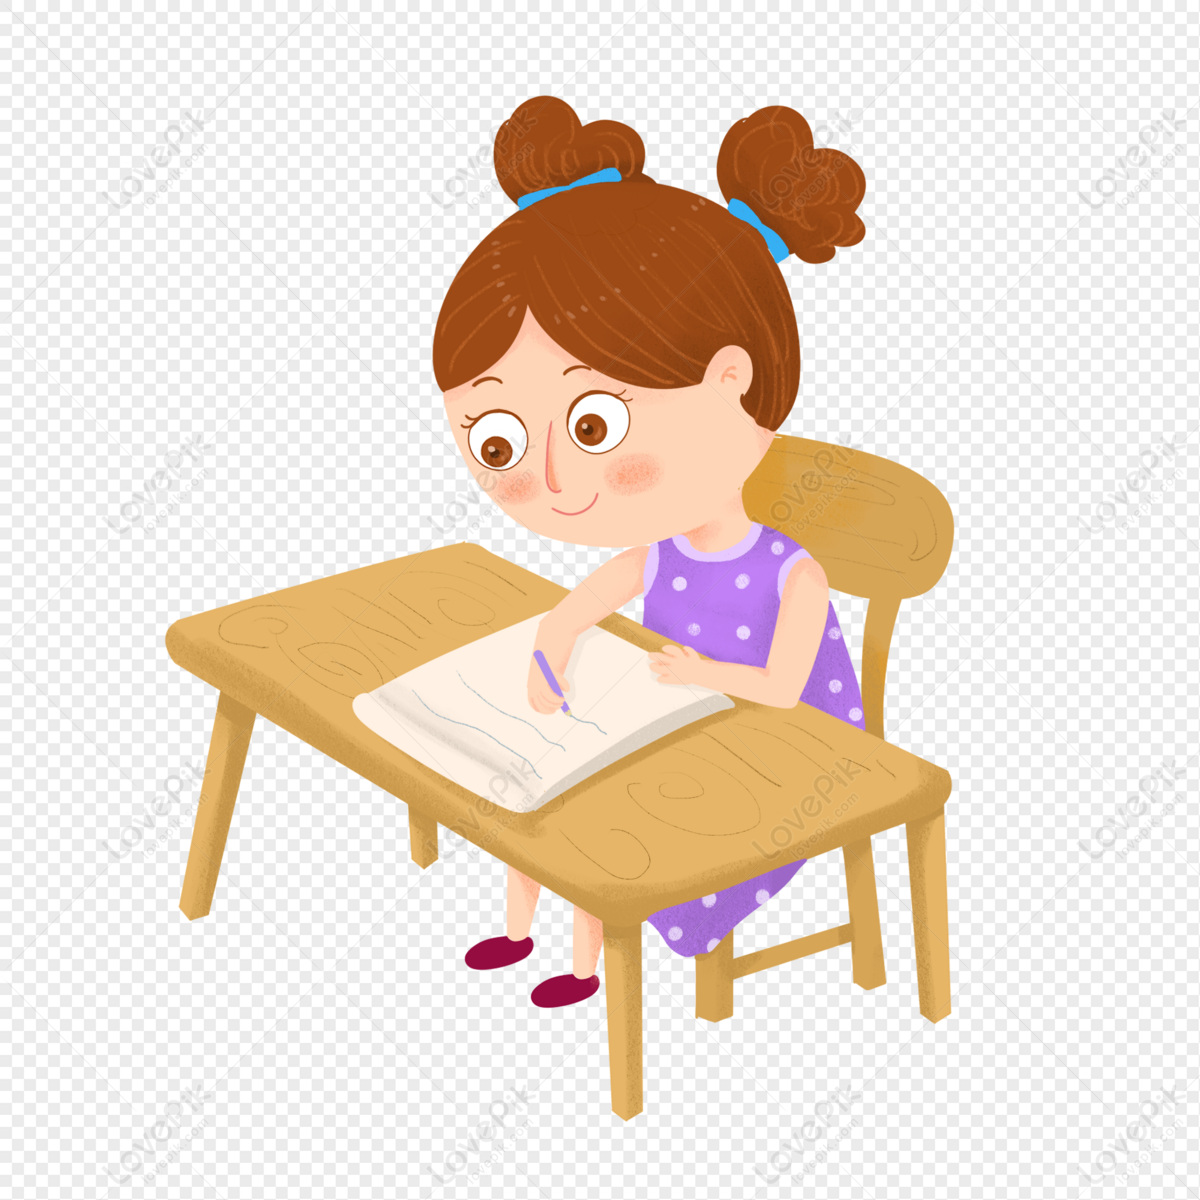 Write homework, school learning, writing girl, characters png image free download